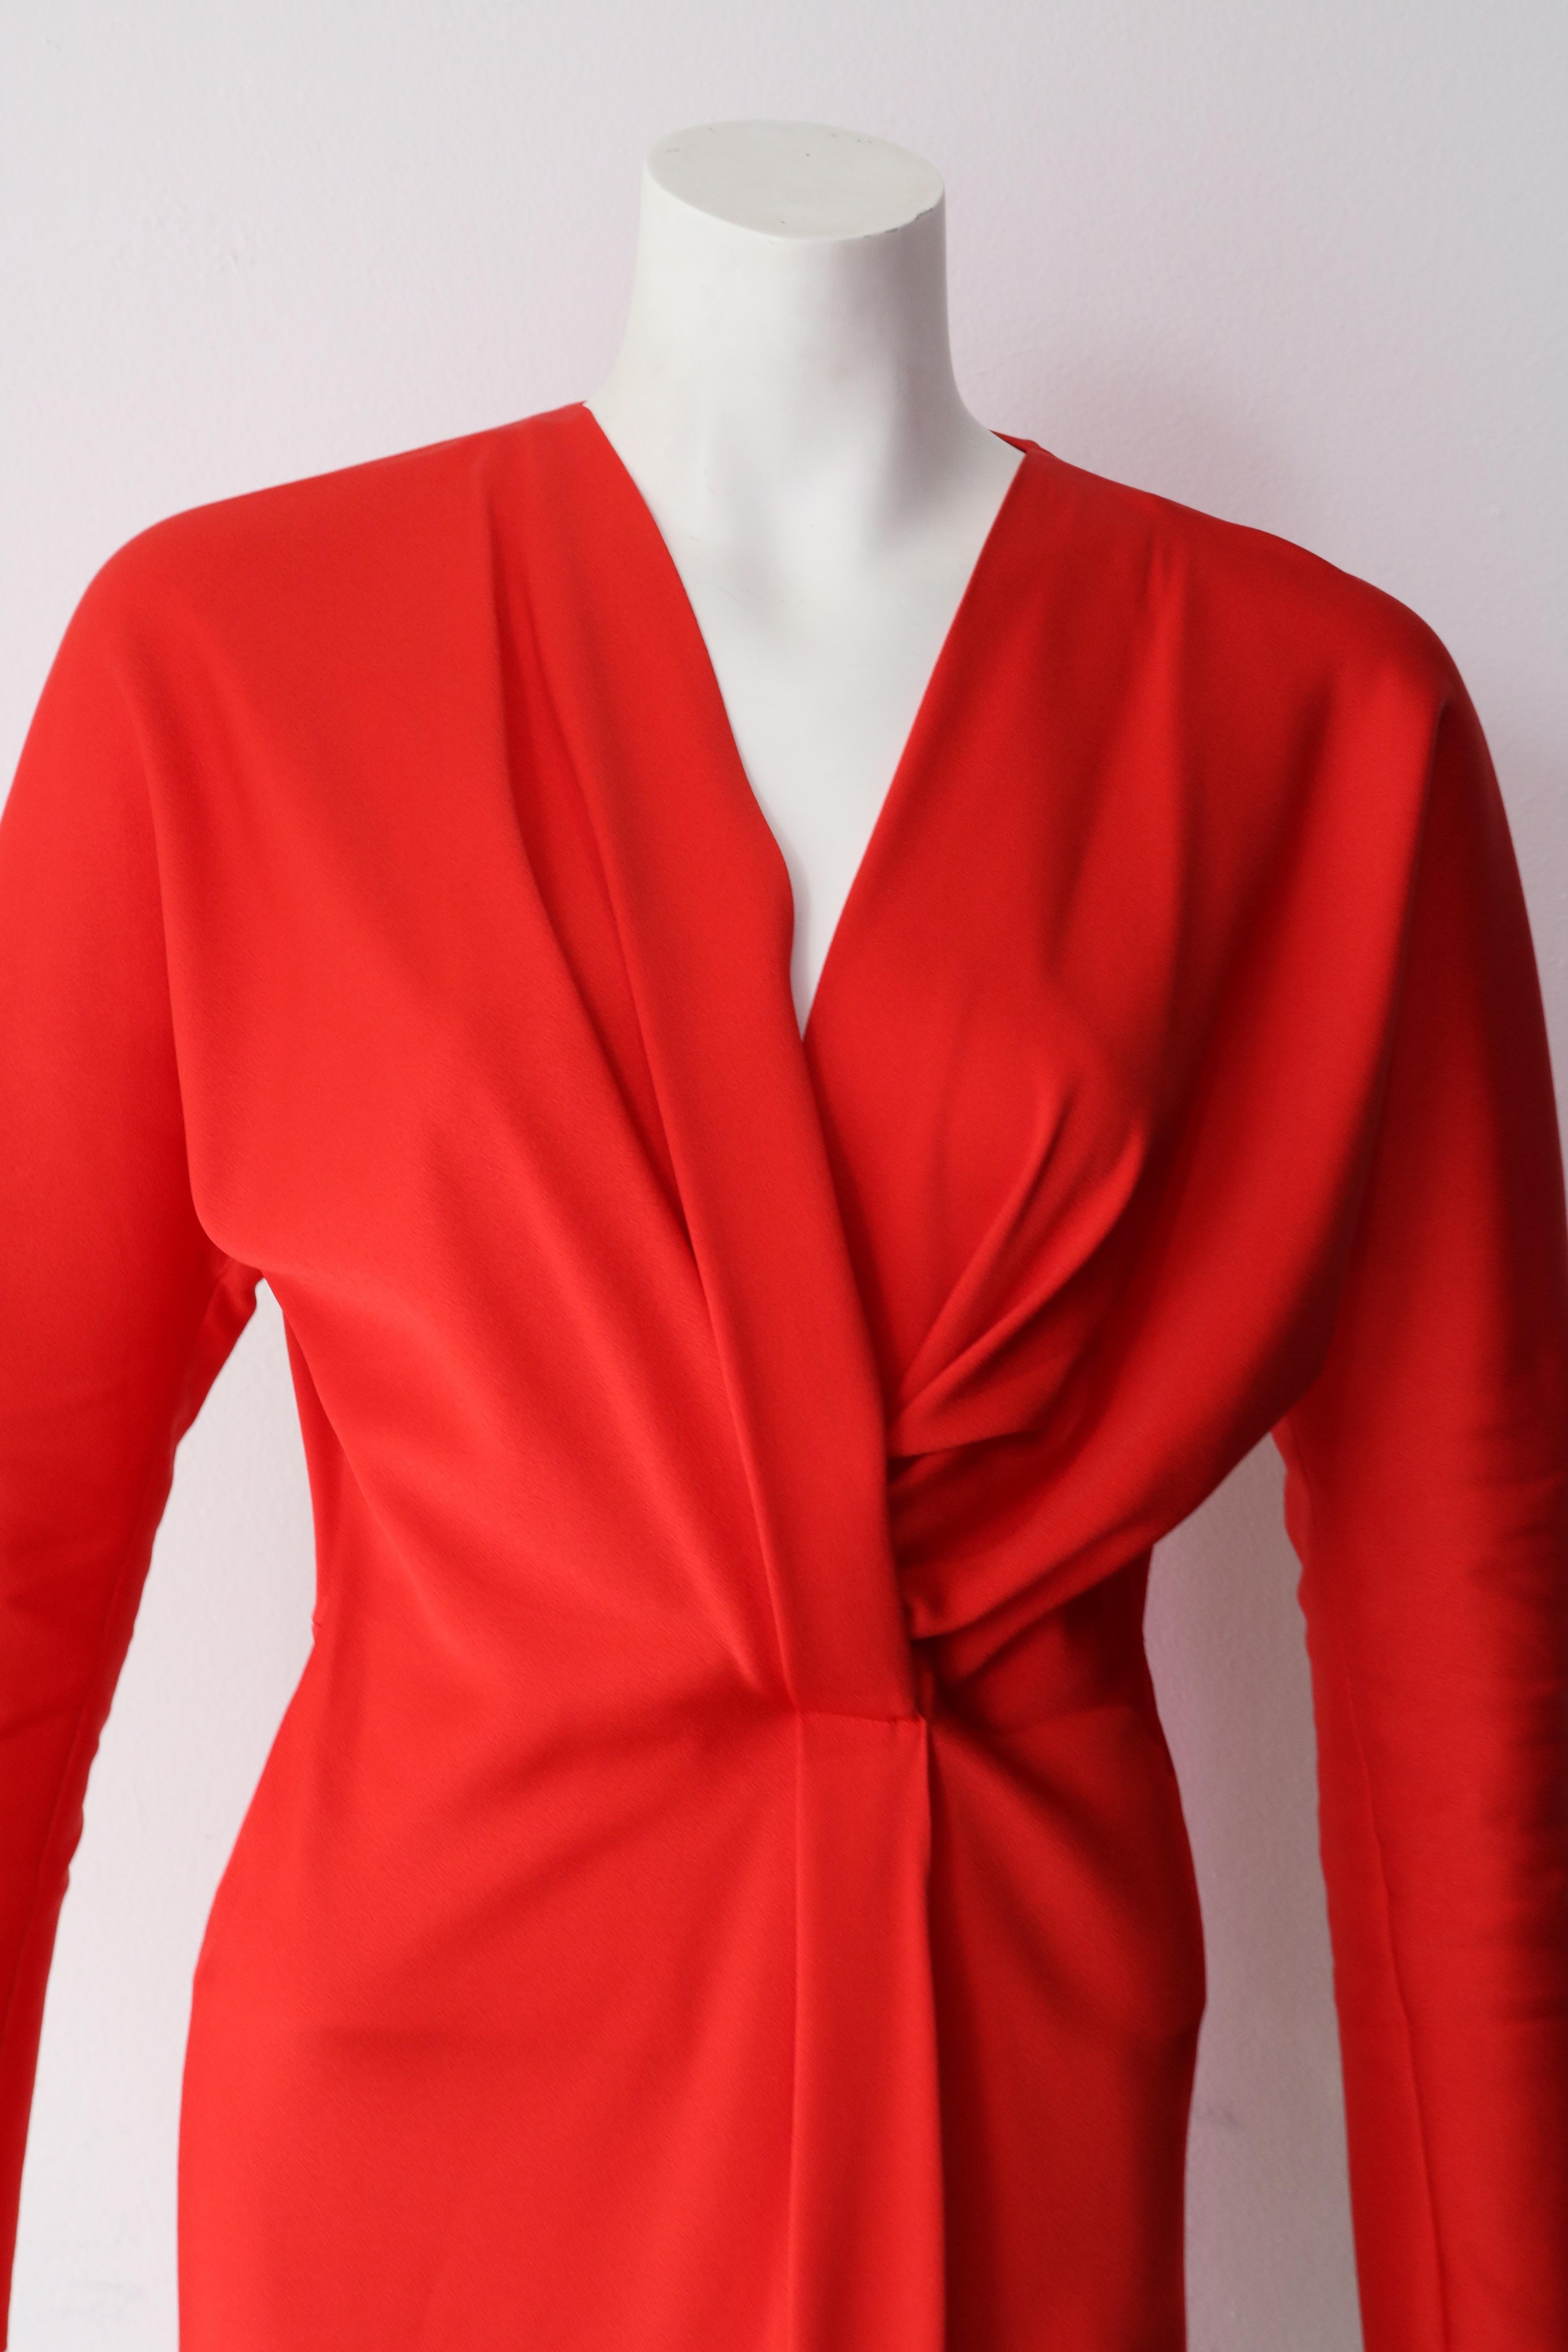 Victoria Beckham Red Cocktail Dress. 
V-neck, Midi length, 3/4 quarter arm. 
Never Been Worn Tags still on. 
Size 8 and 10 available (fits smaller) 
Original Price $2770 